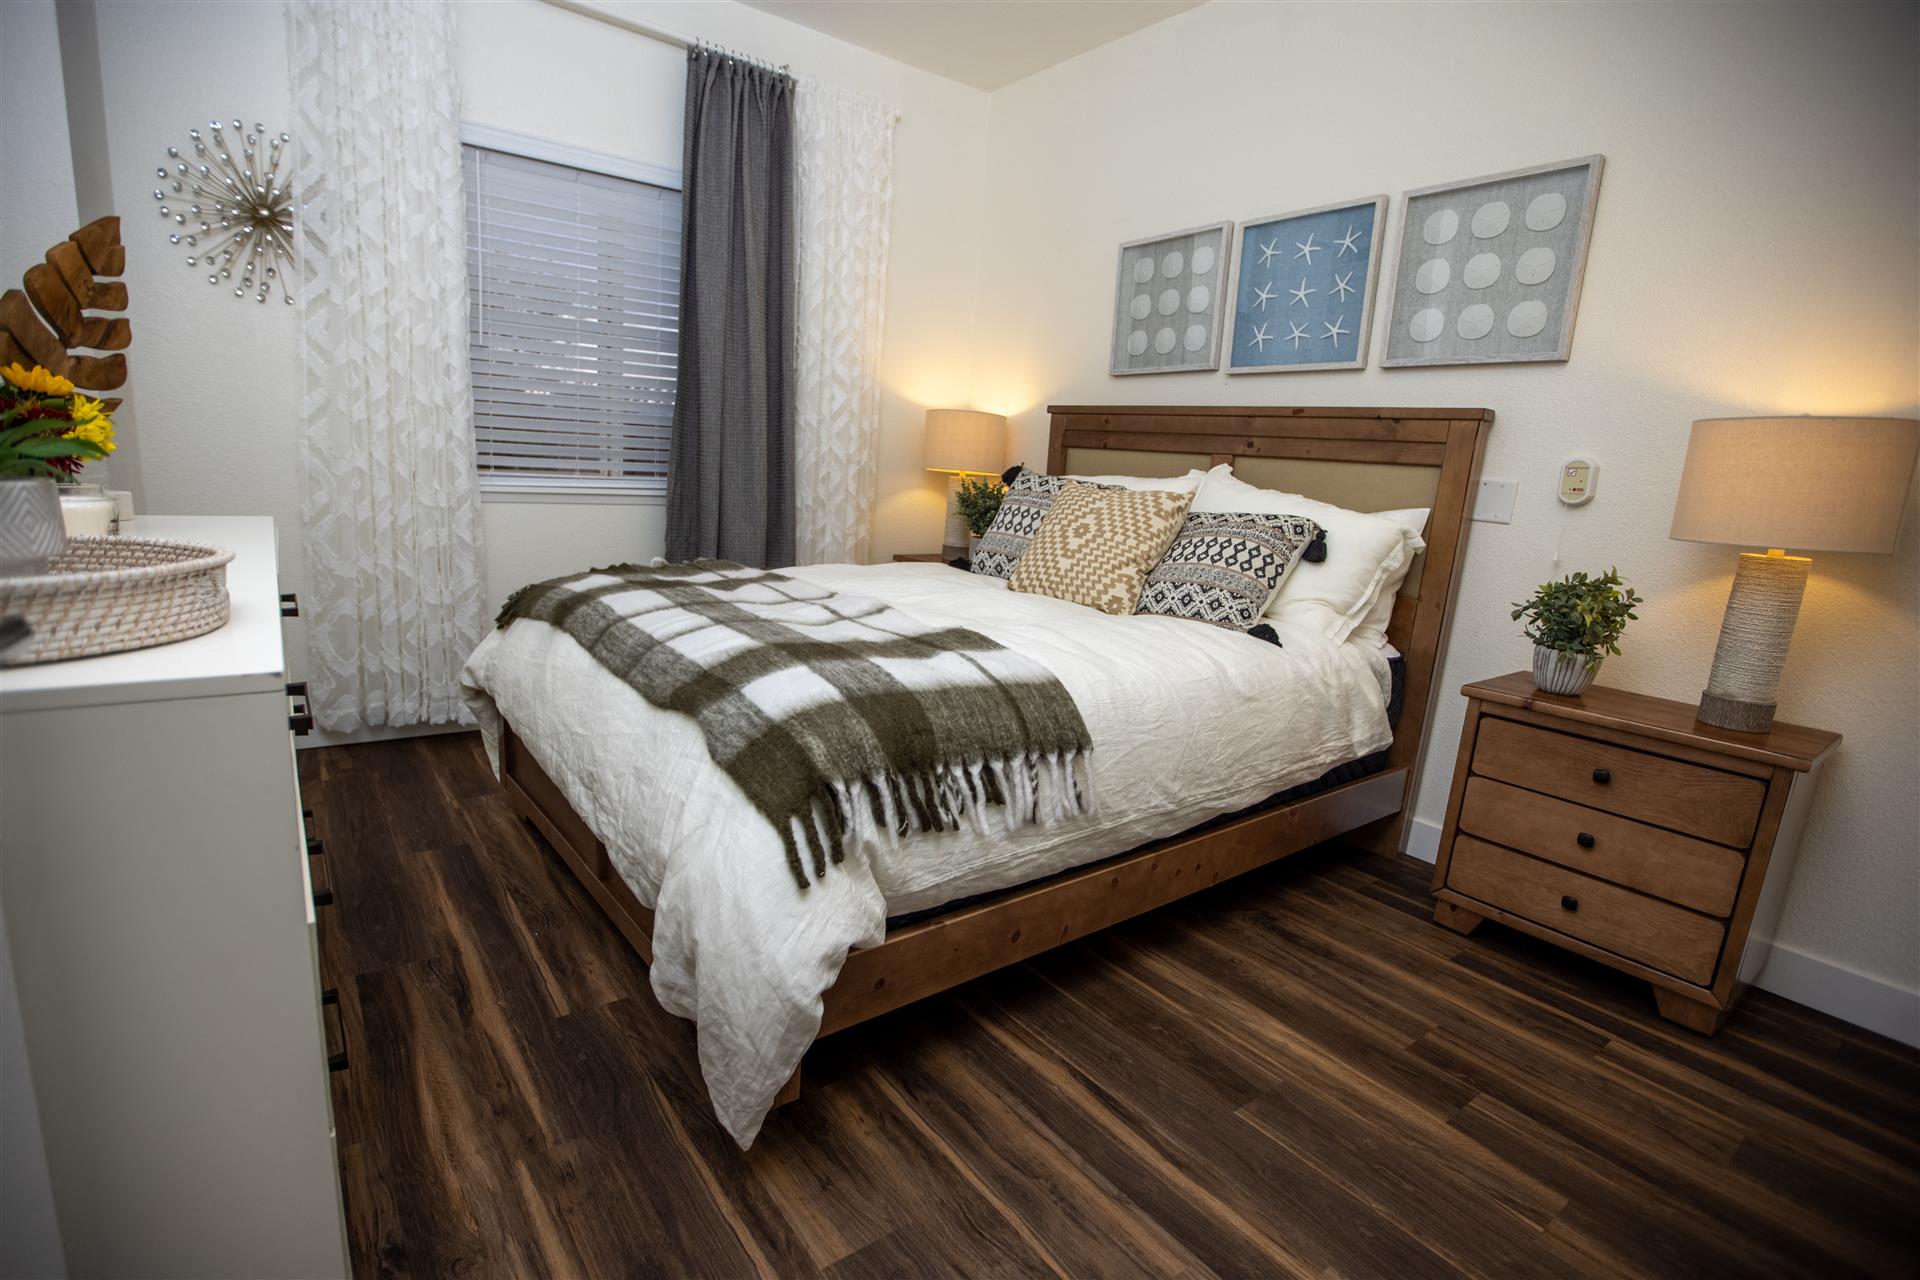 Bedroom with cozy bed at Cogir of Stock Ranch, Citrus Heights, California